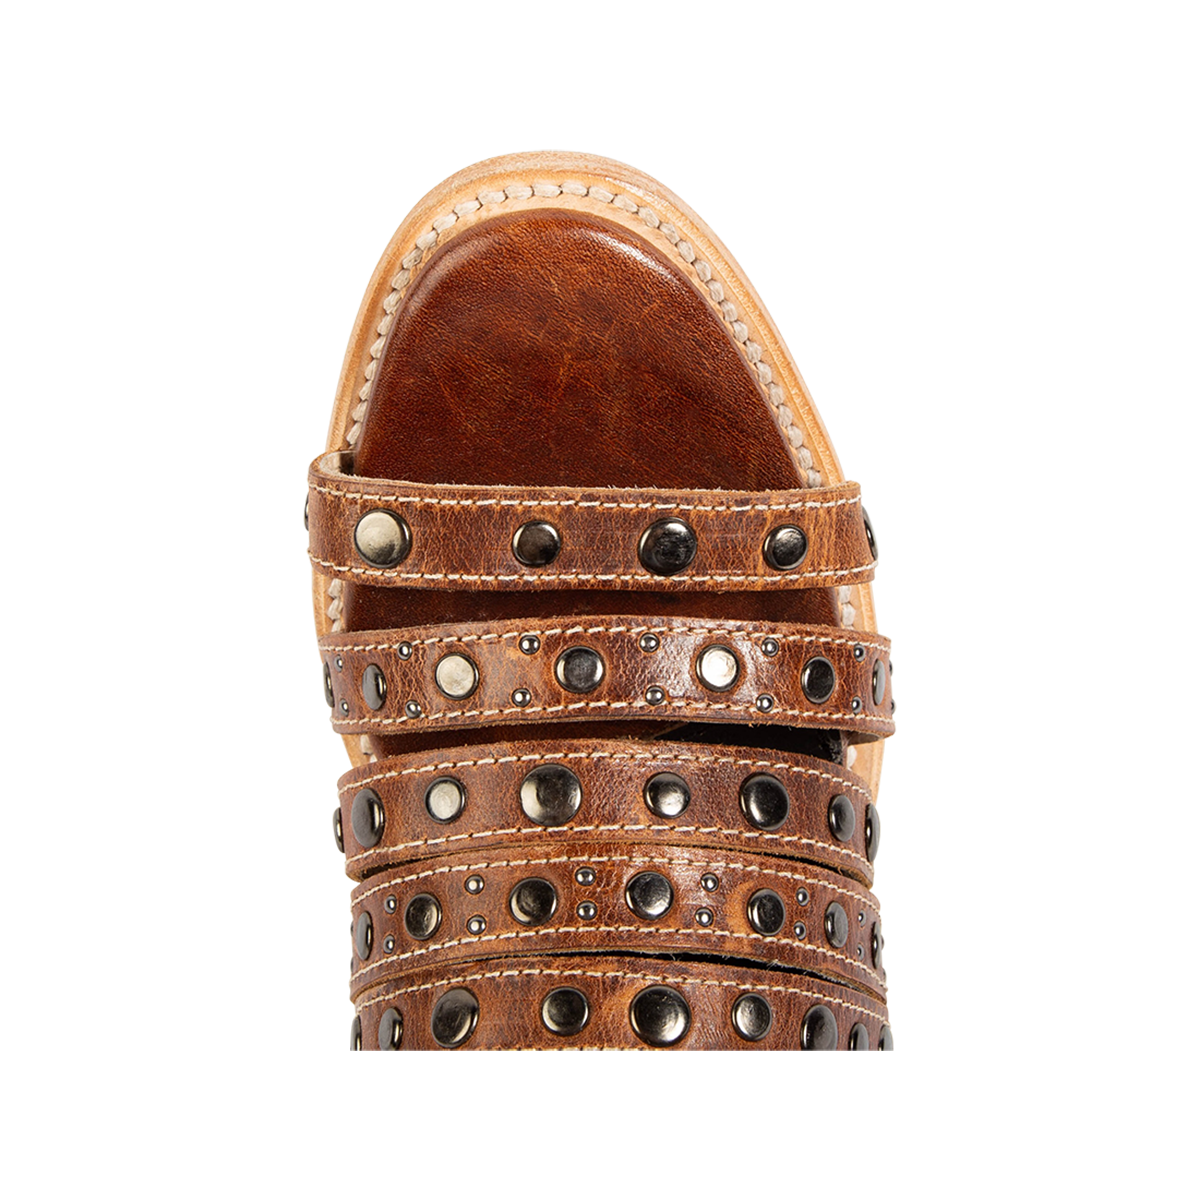 Top view showing open toe construction and embellished leather straps on FREEBIRD women's Cannes cognac leather sandal